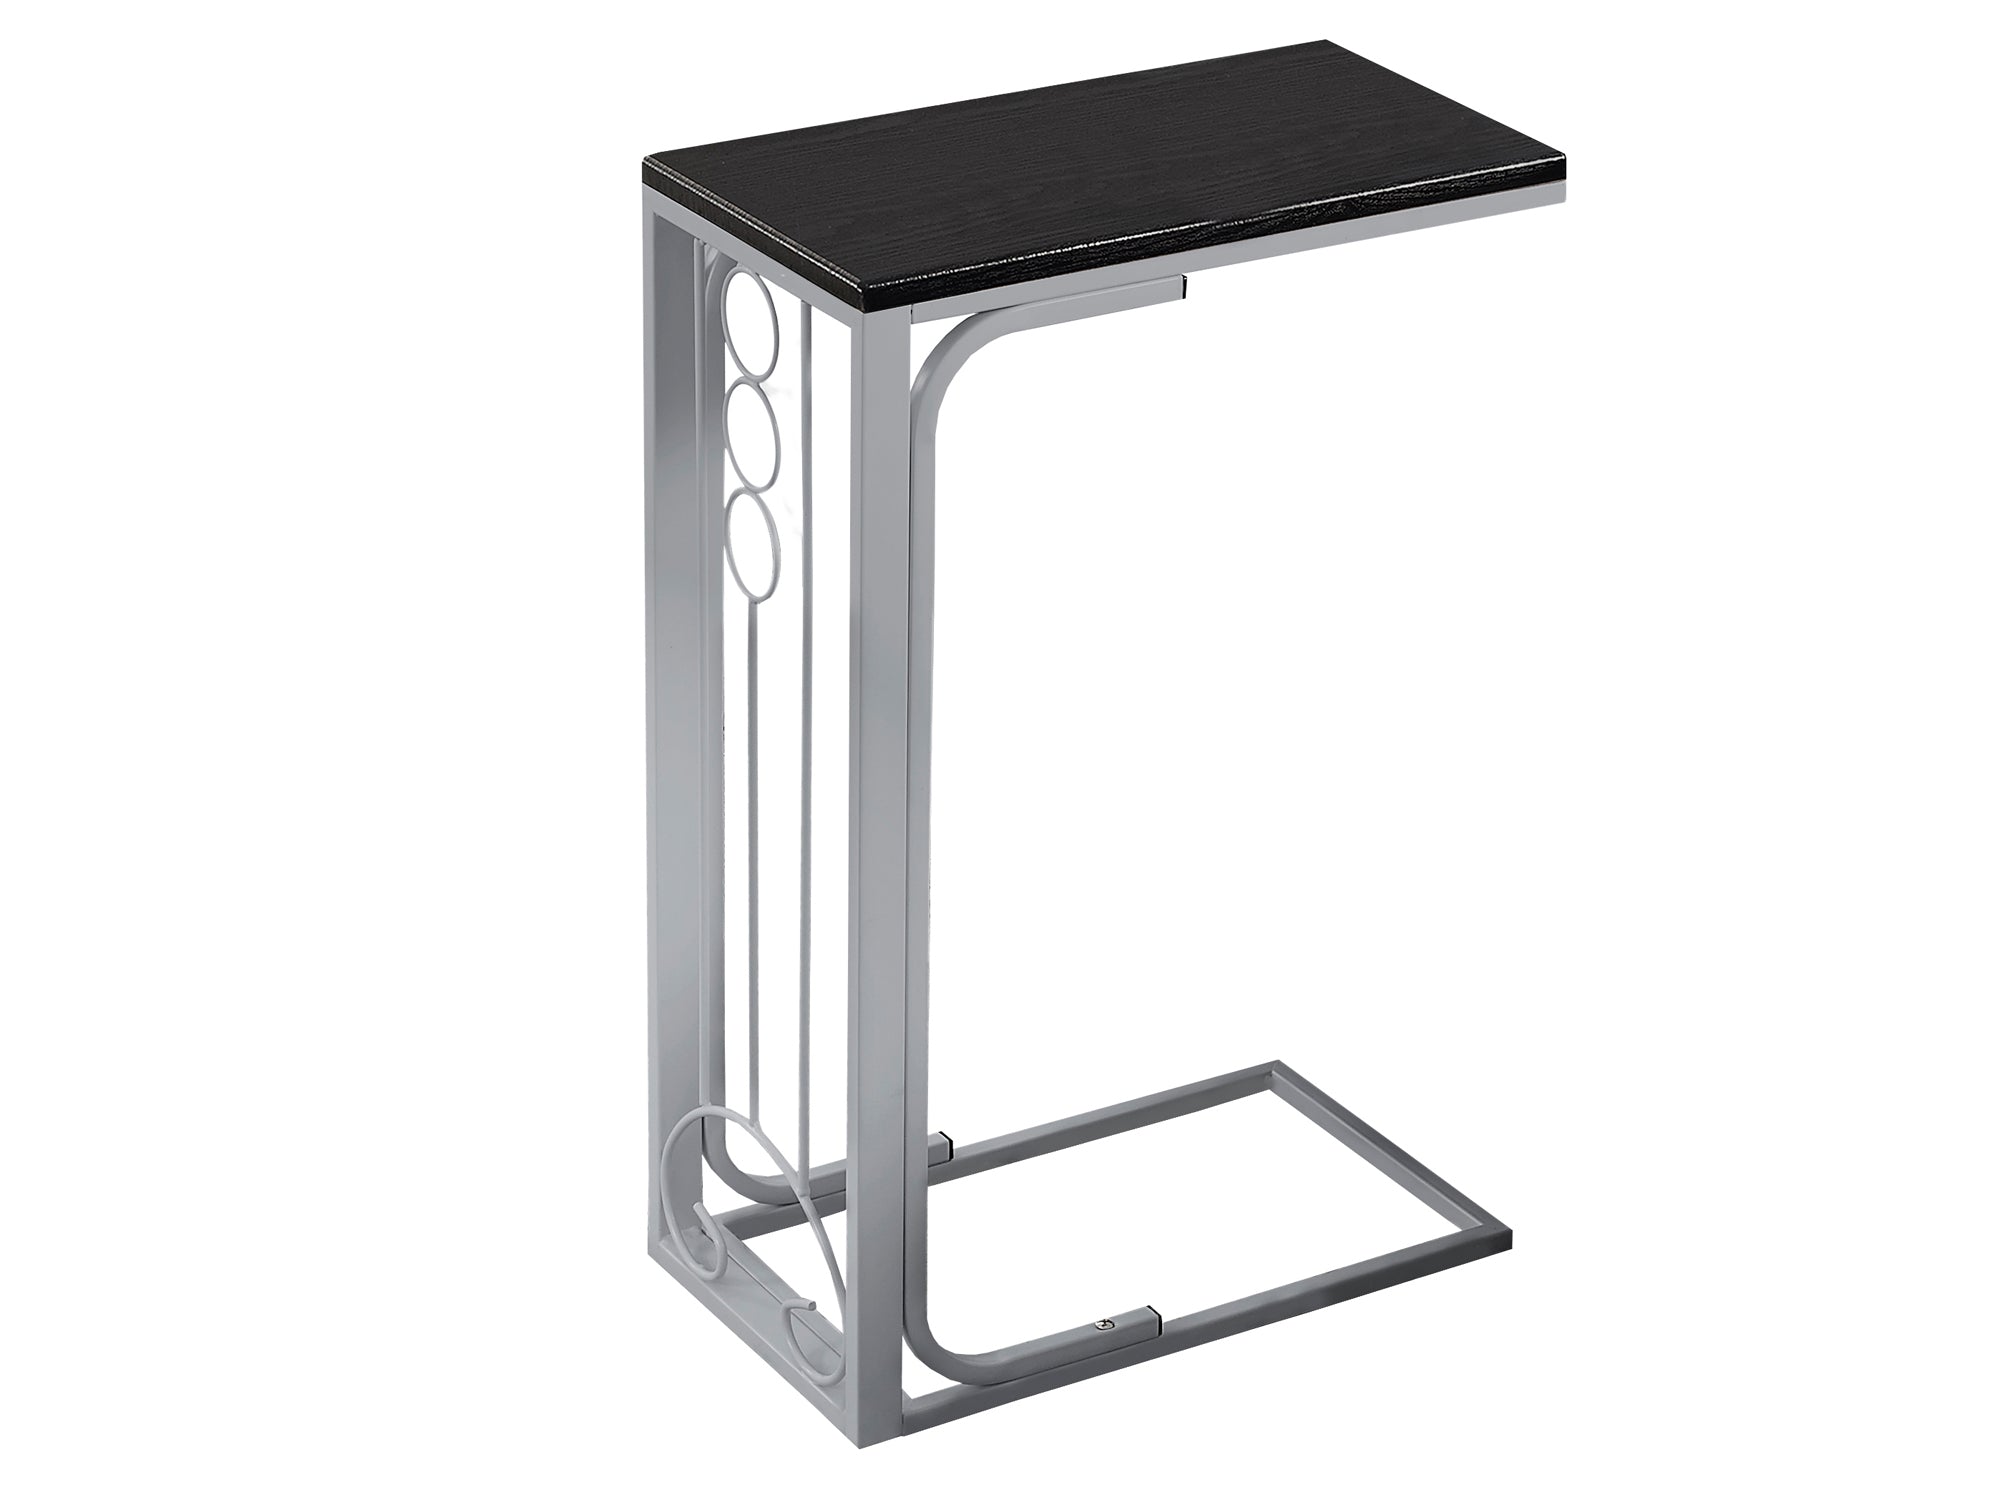 16" x 9" x 24.5" BlackSilver MDF and Metal Accent Table